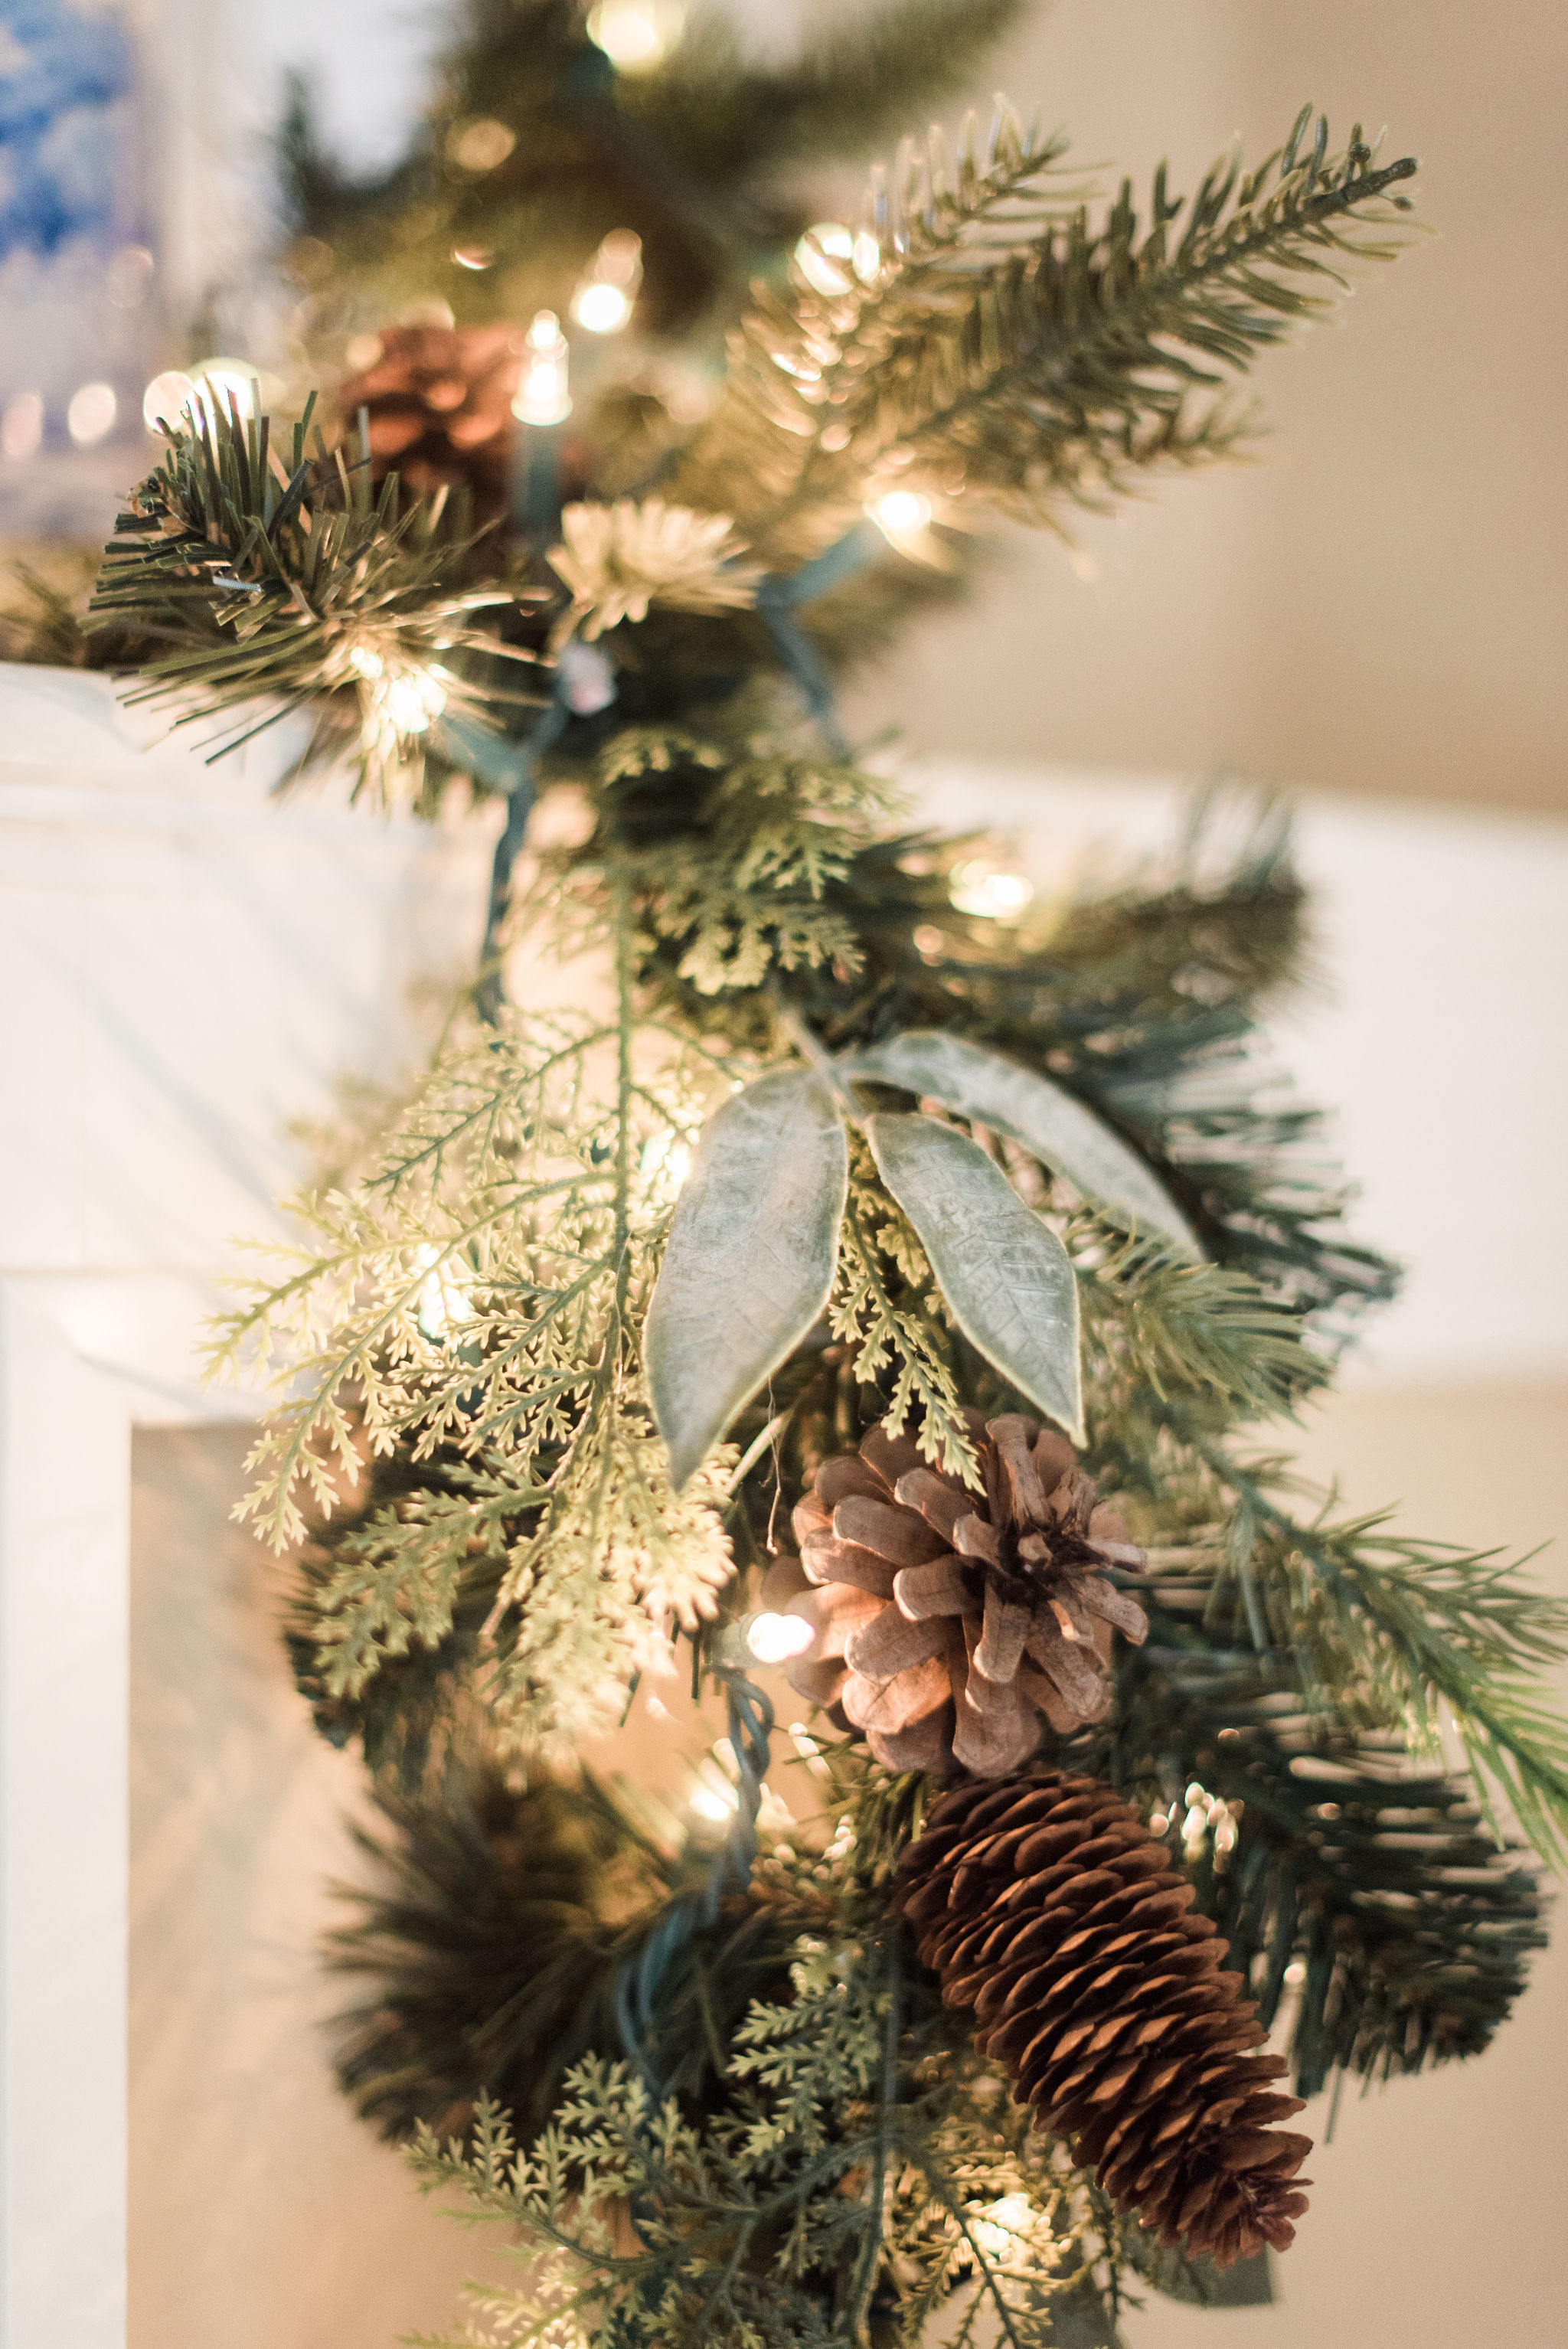 How To Save On Christmas Decorations - Thrifty Pineapple